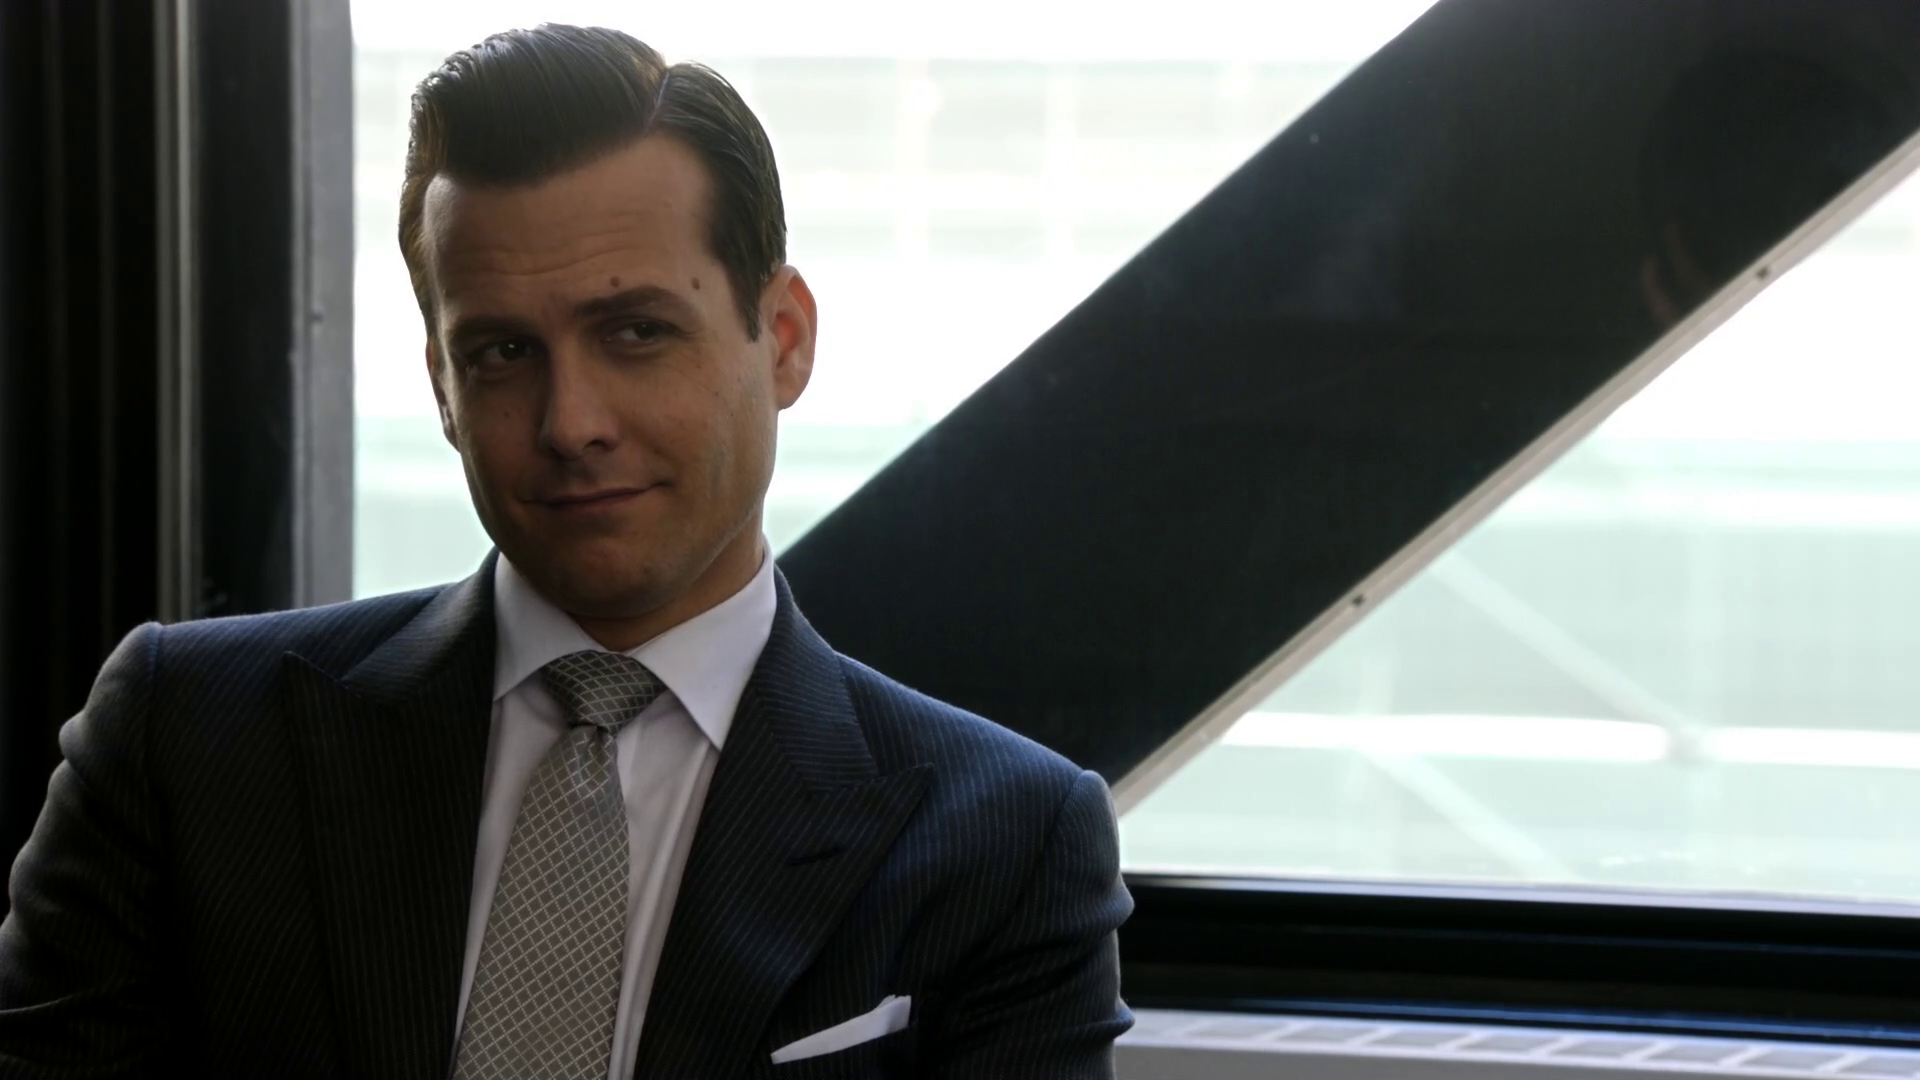 Image - S01E04P15 Harvey.png | Suits Wiki | FANDOM powered by Wikia